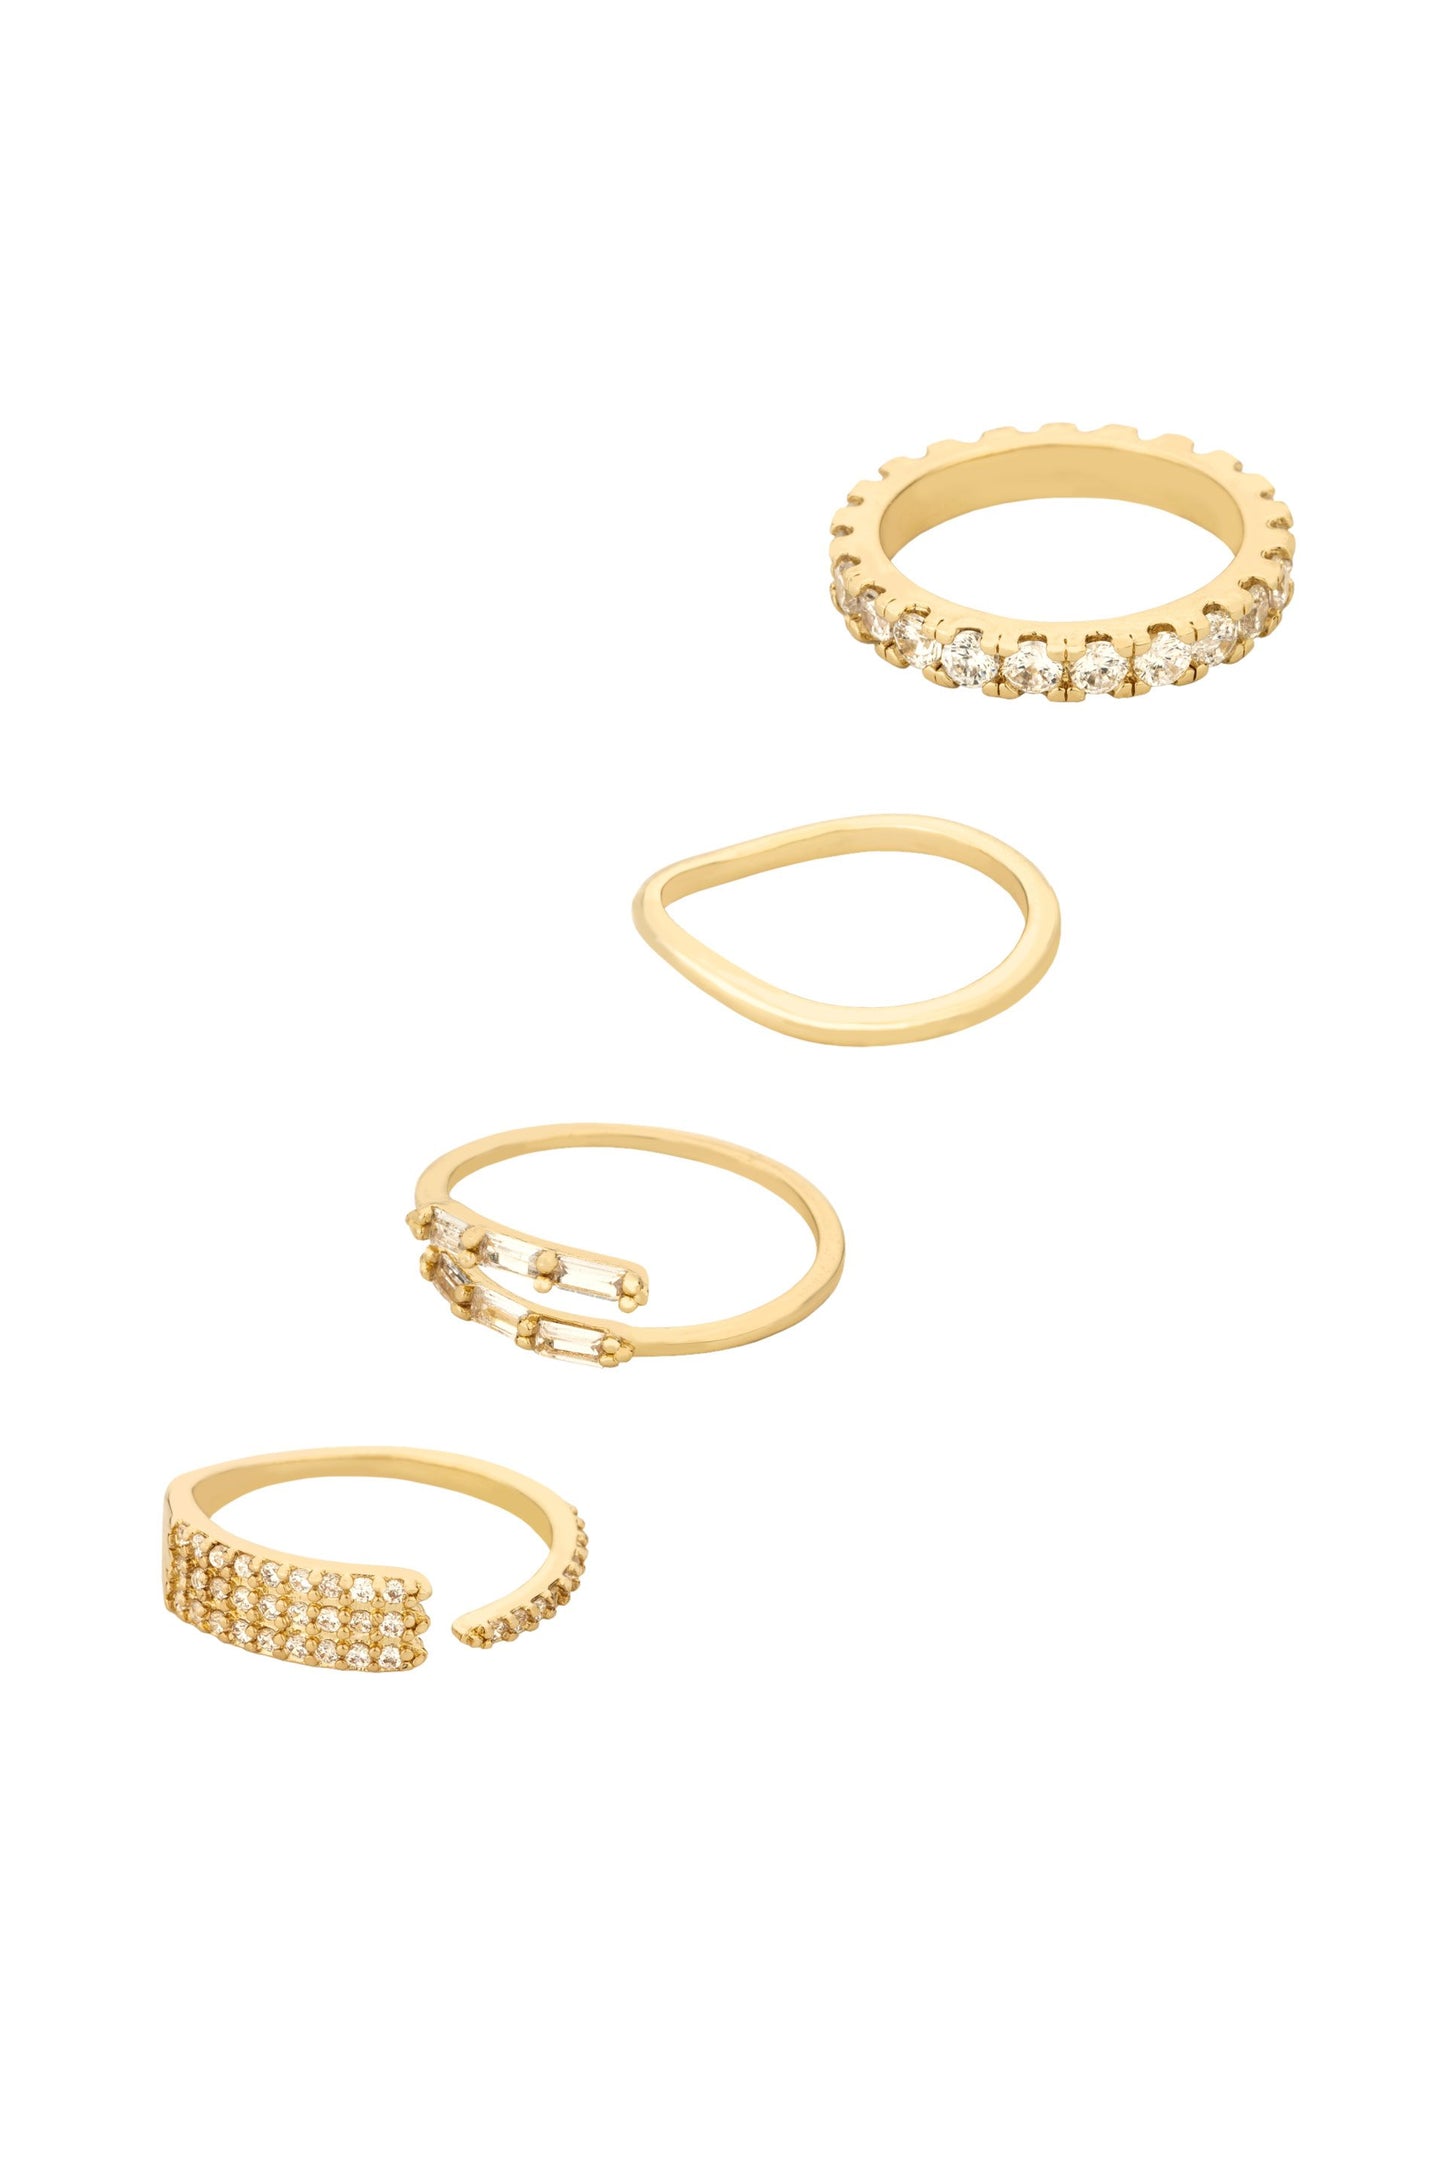 Crystal Lovers 18k Gold Plated Ring Set on white background